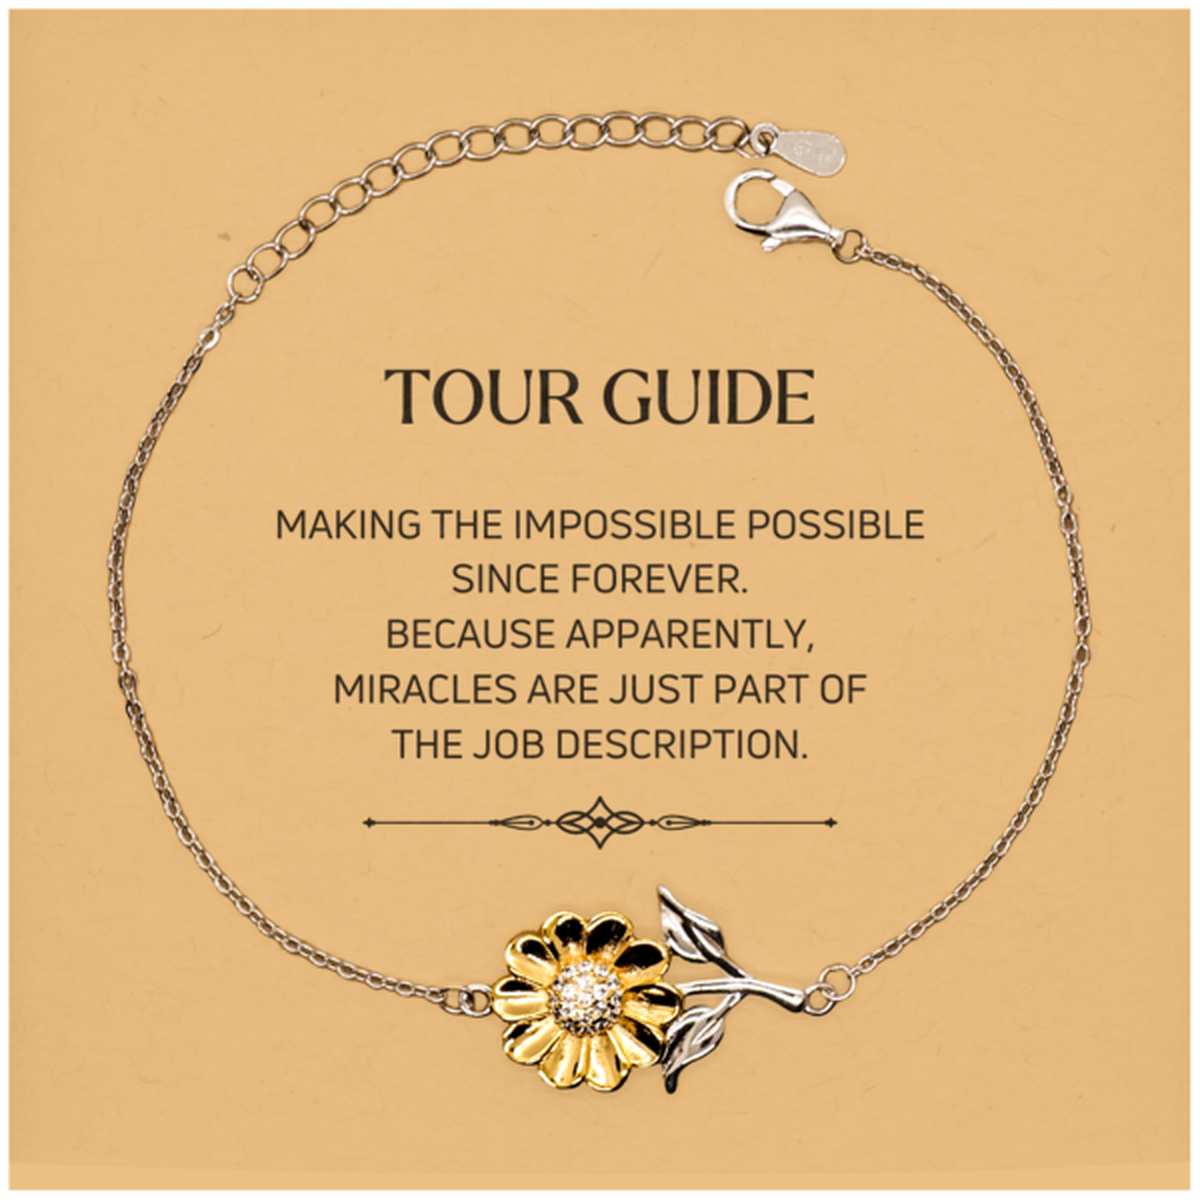 Funny Tour Guide Gifts, Miracles are just part of the job description, Inspirational Birthday Christmas Sunflower Bracelet For Tour Guide, Men, Women, Coworkers, Friends, Boss